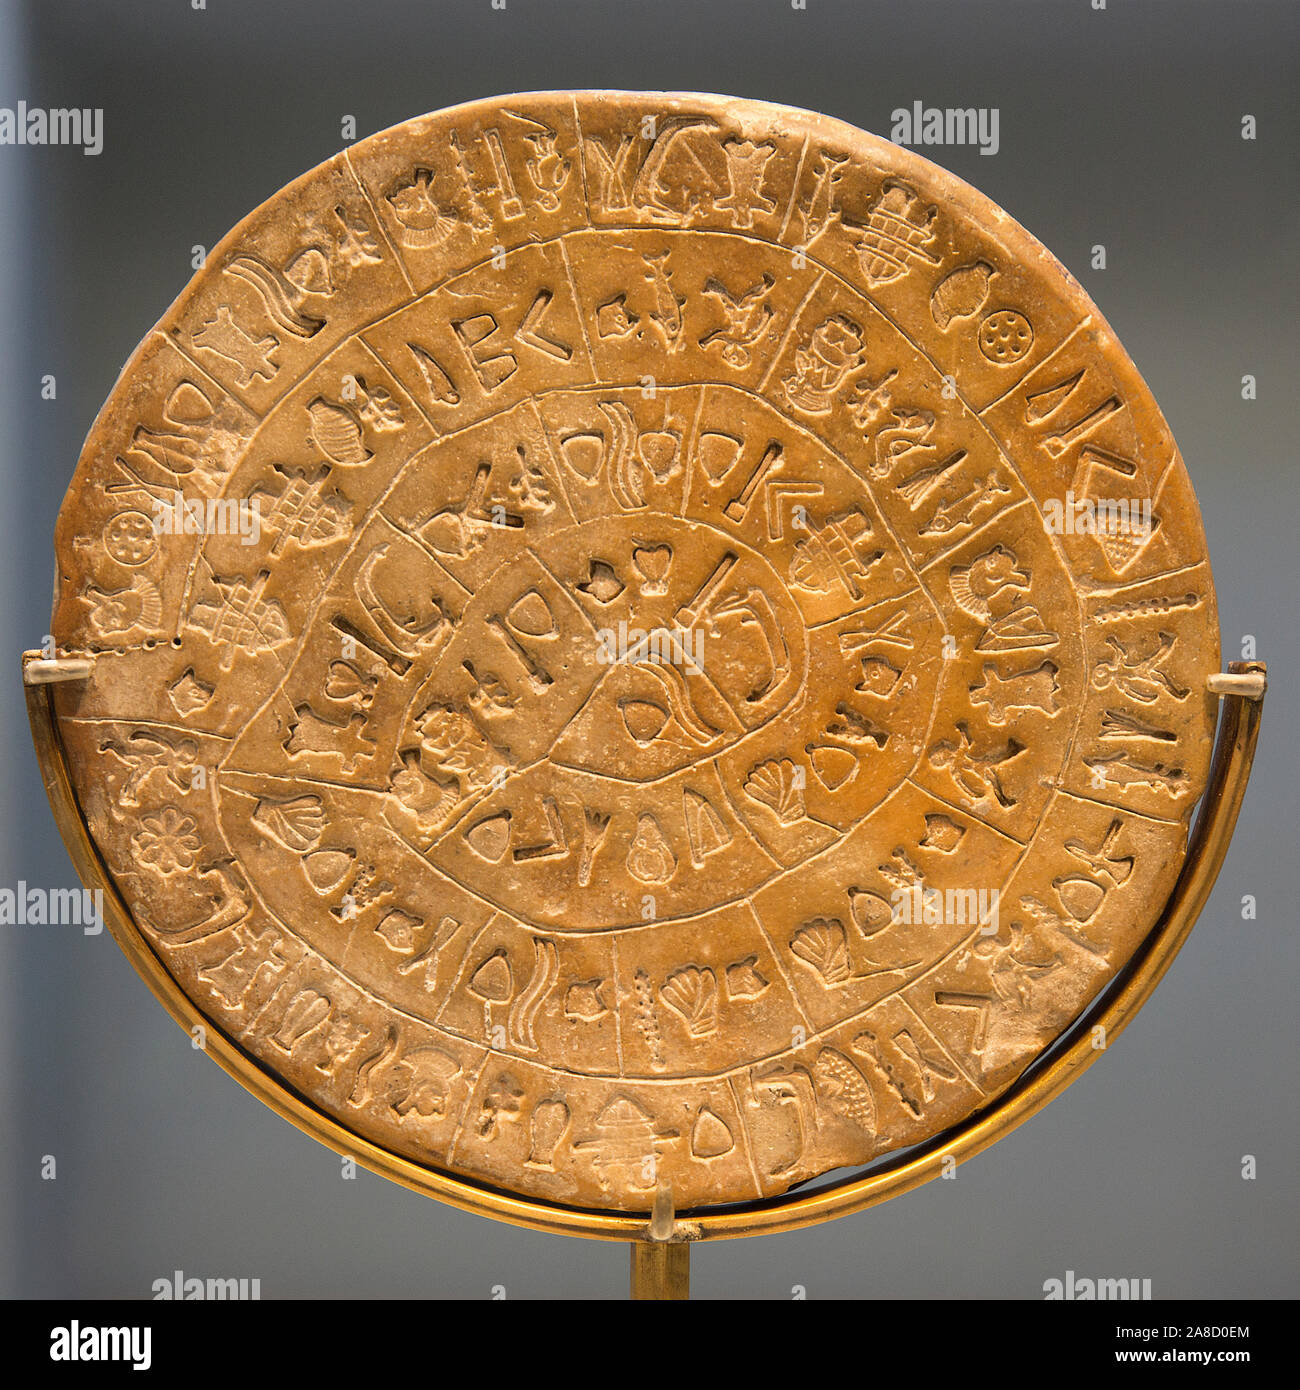 Heraklion, Crete, Greece. The celebrated Phaistos Disc on display in the Heraklion Archaeological Museum. Stock Photo